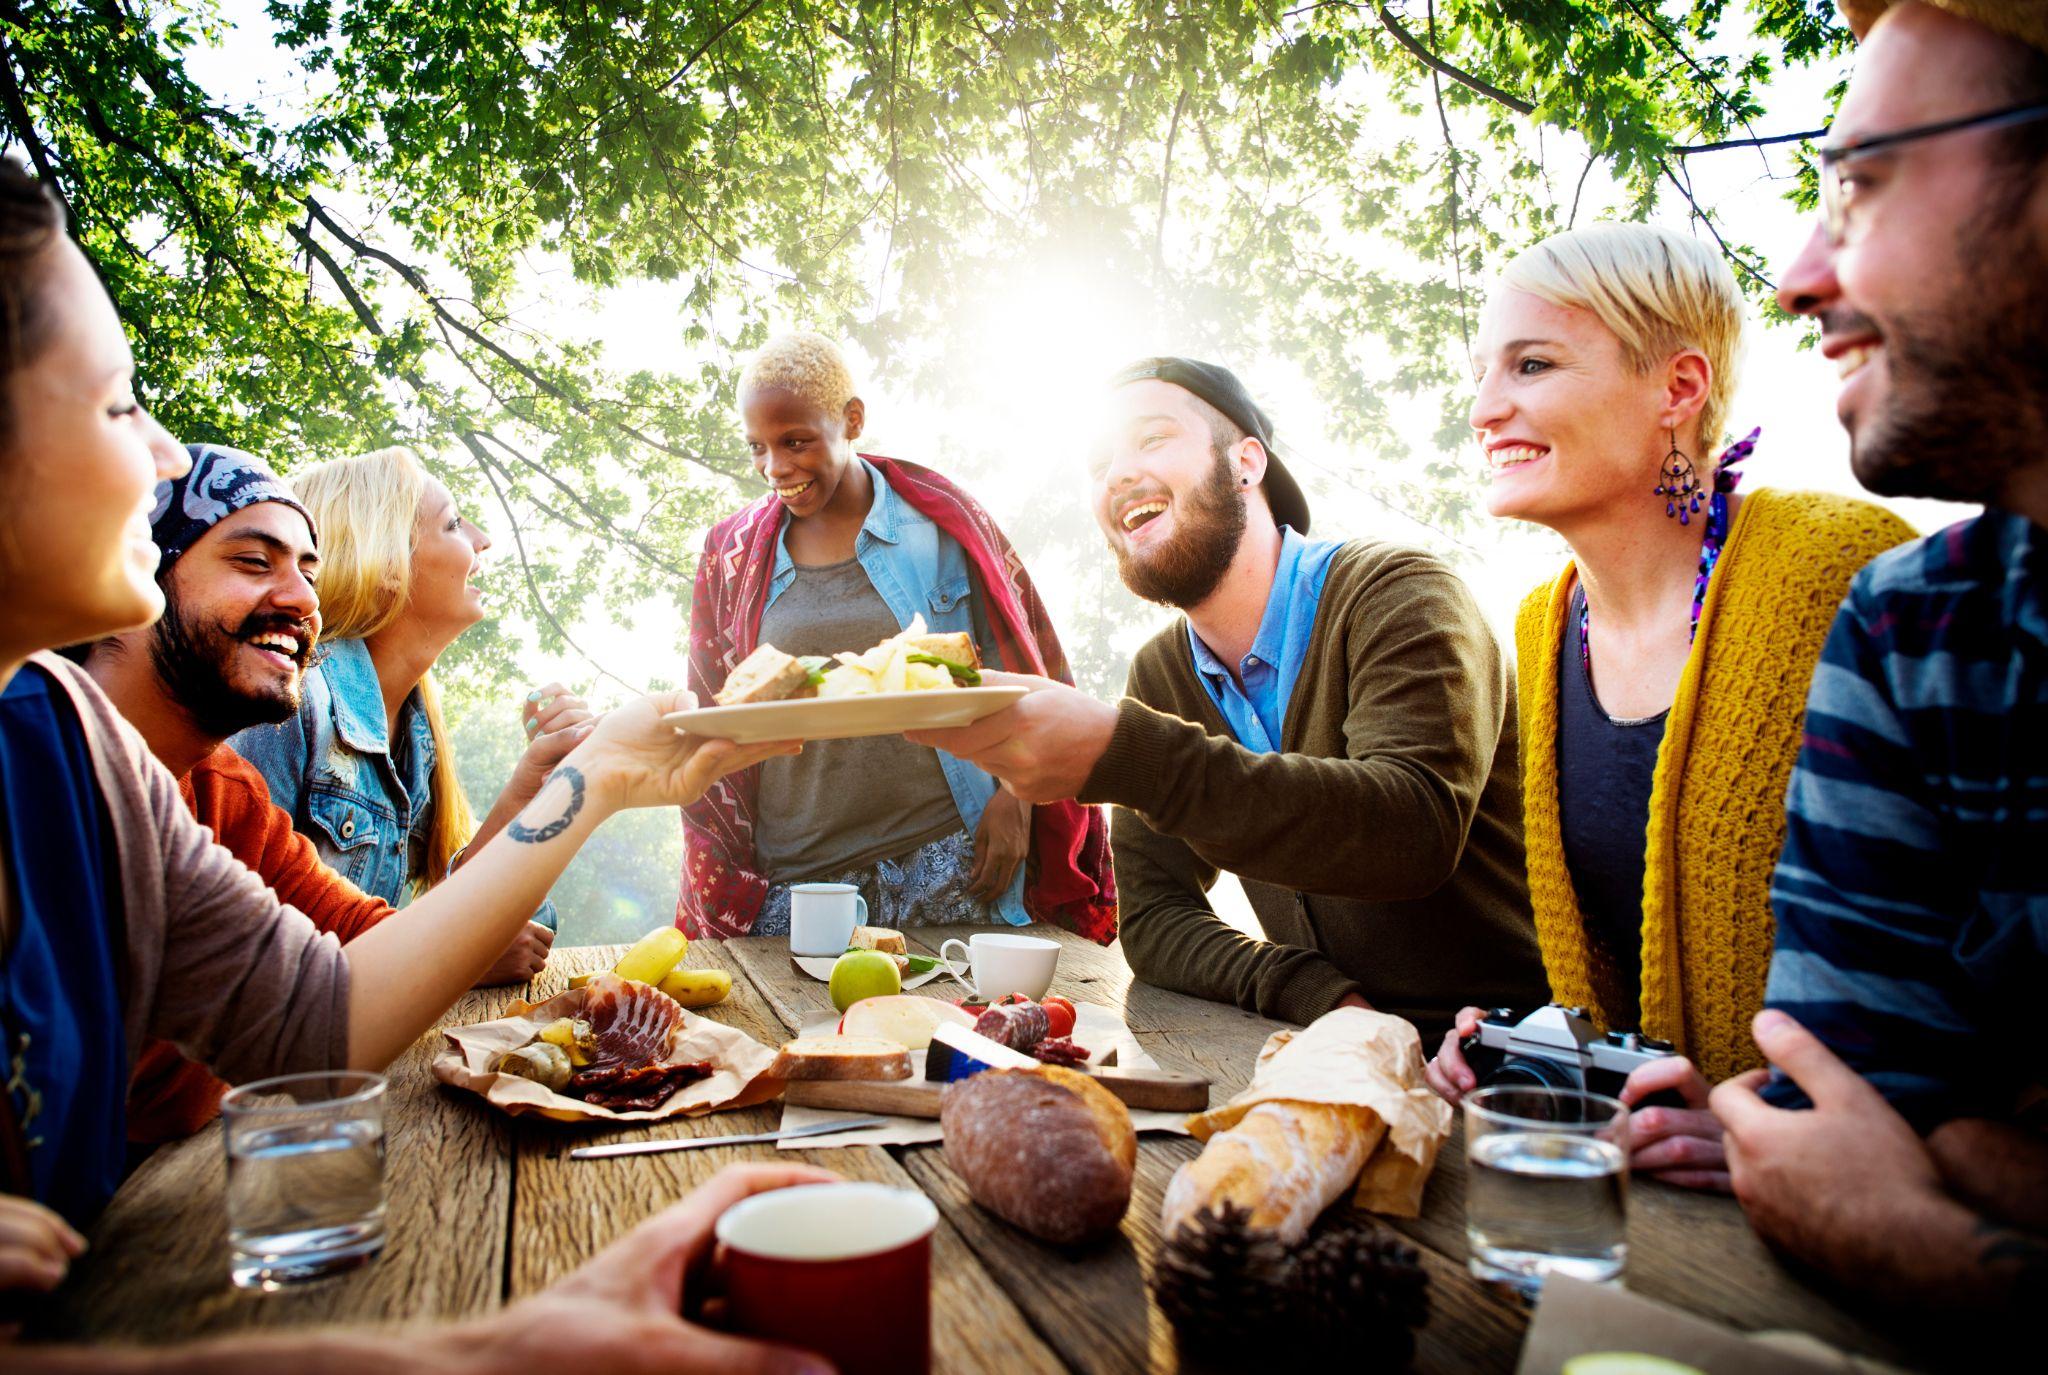 Friends friendship outdoor dining people concept